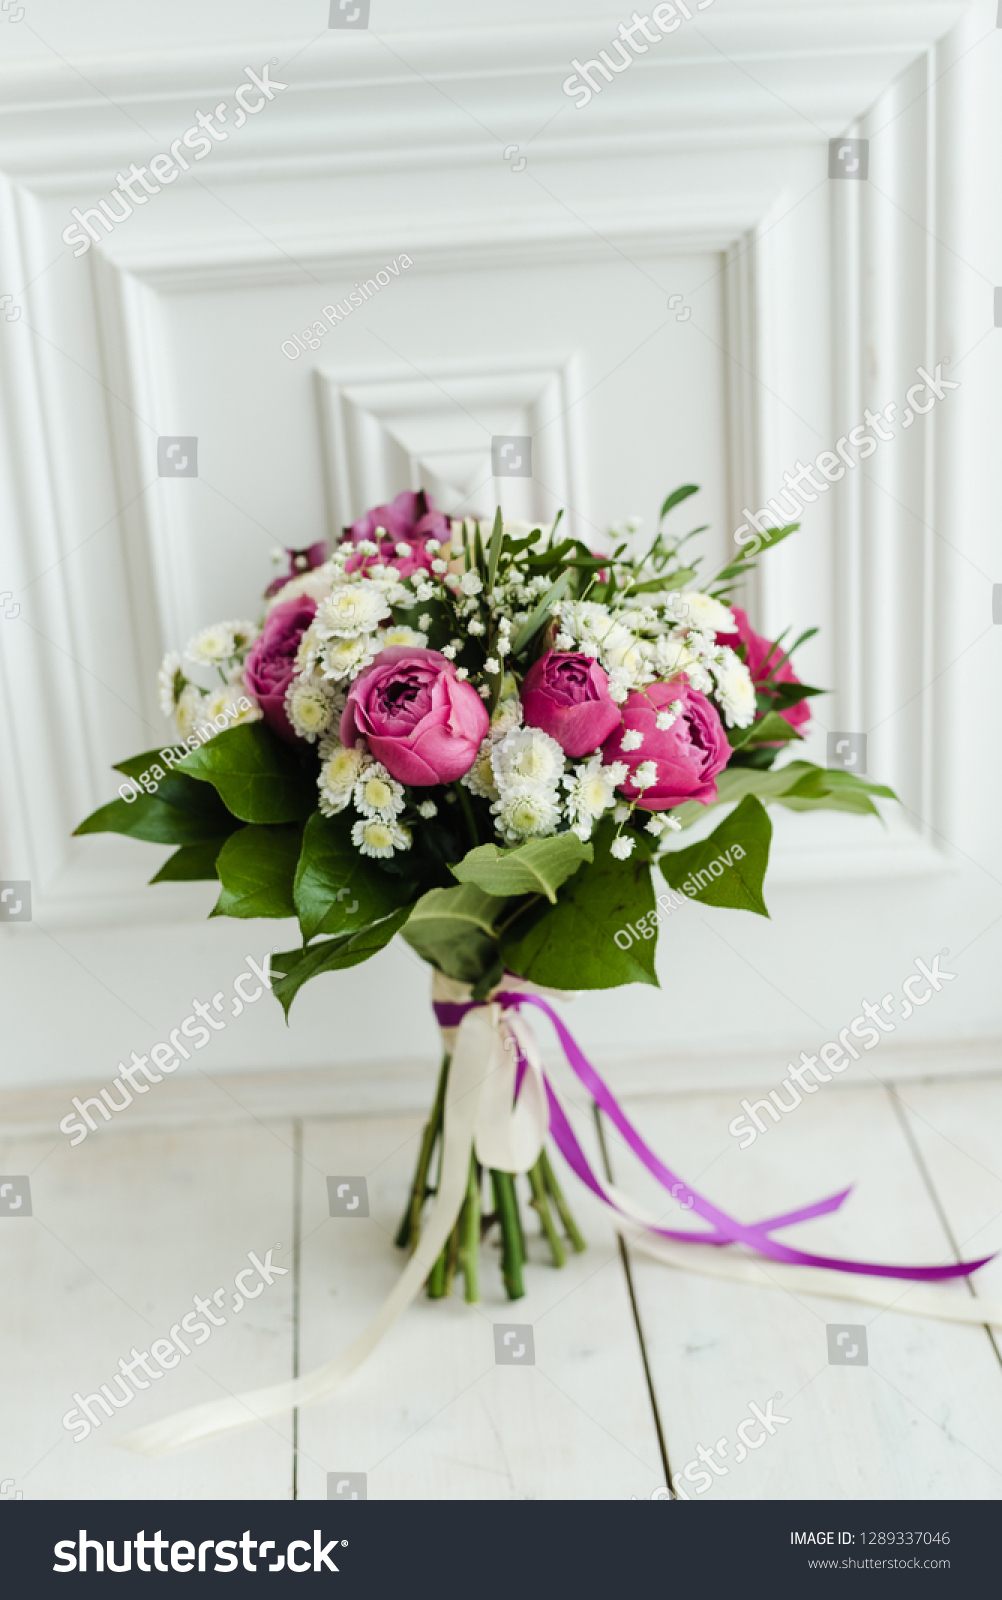 the bride's bouquet, bridal bouquet of pink roses, wedding flowers, wedding day #1289337046